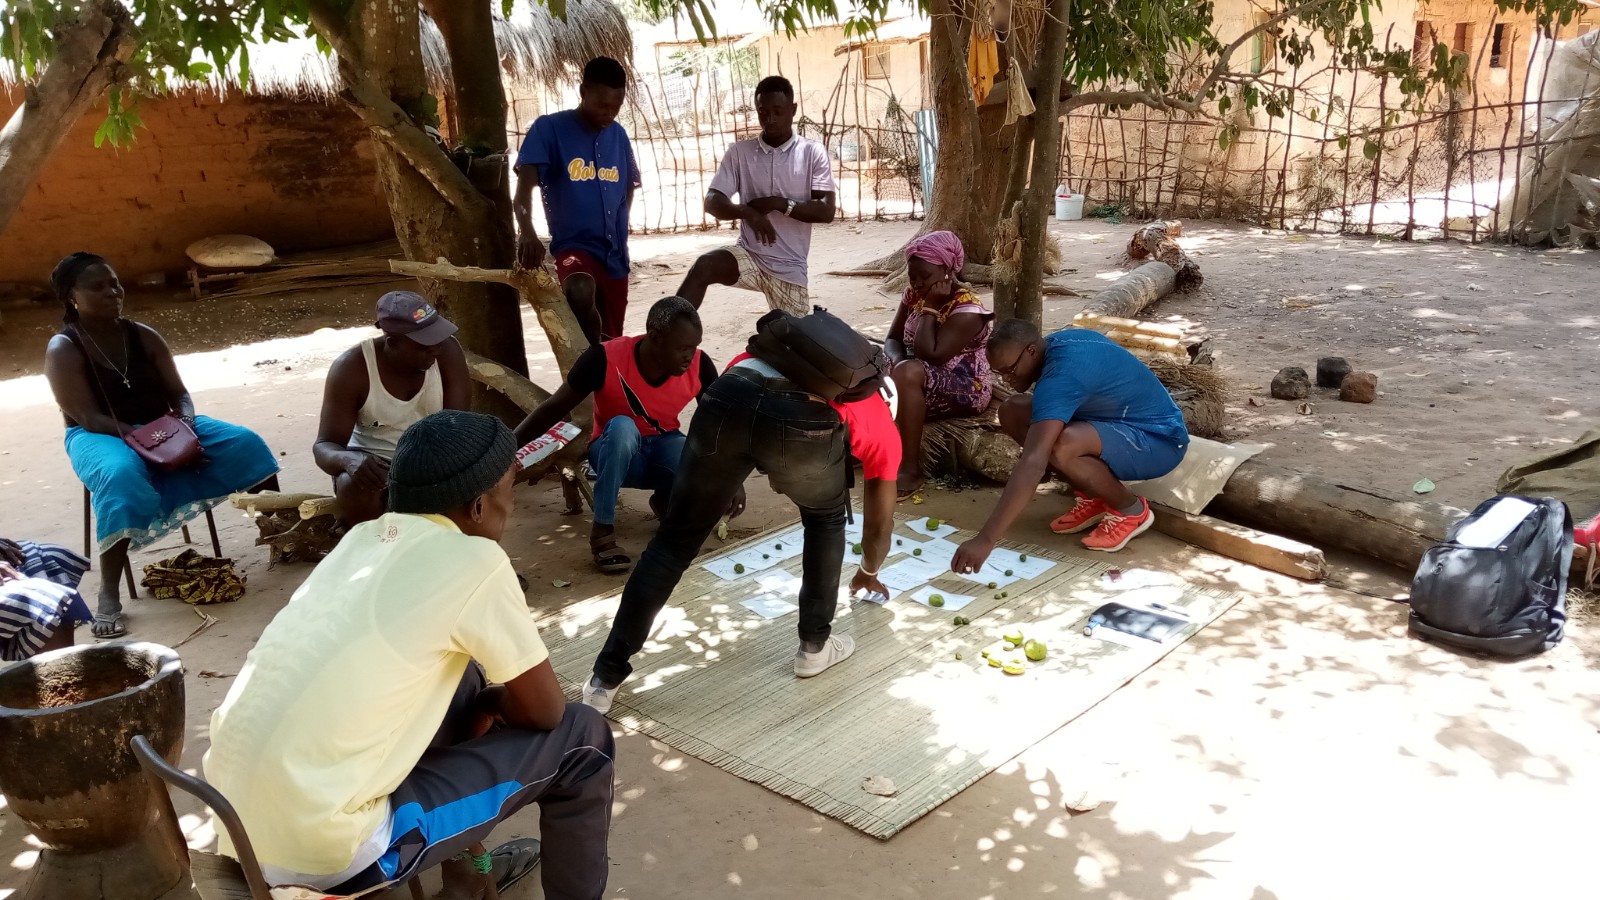 Practicing dialect mapping with a group in Guinea Bissau as part of Giving Back